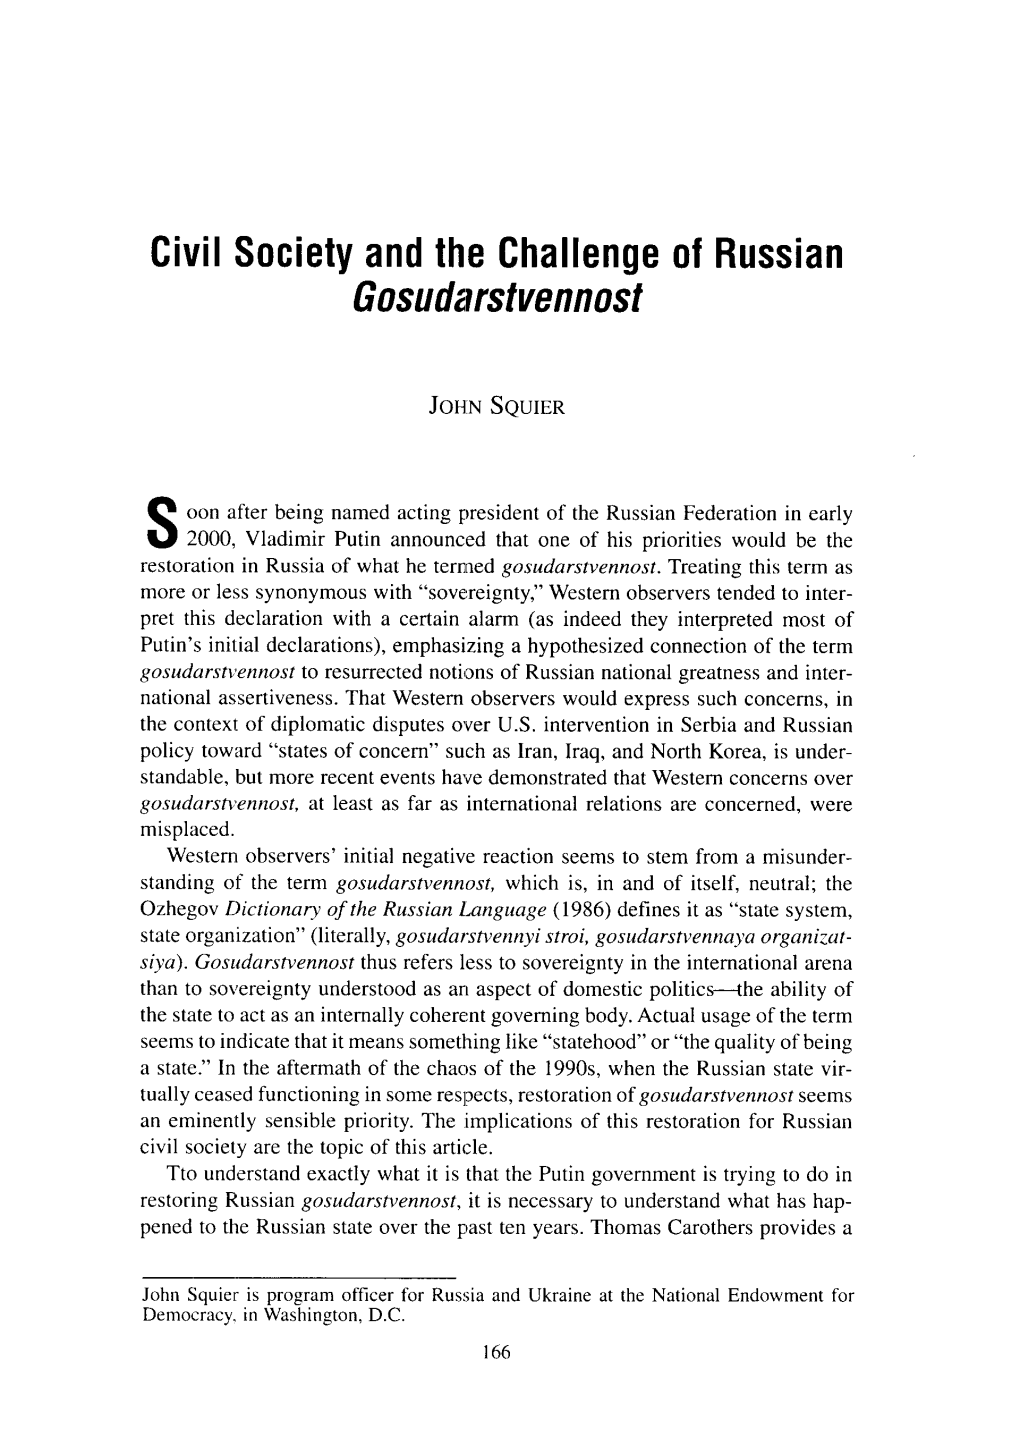 Civil Society and the Challenge of Russian Gosudairstvennost